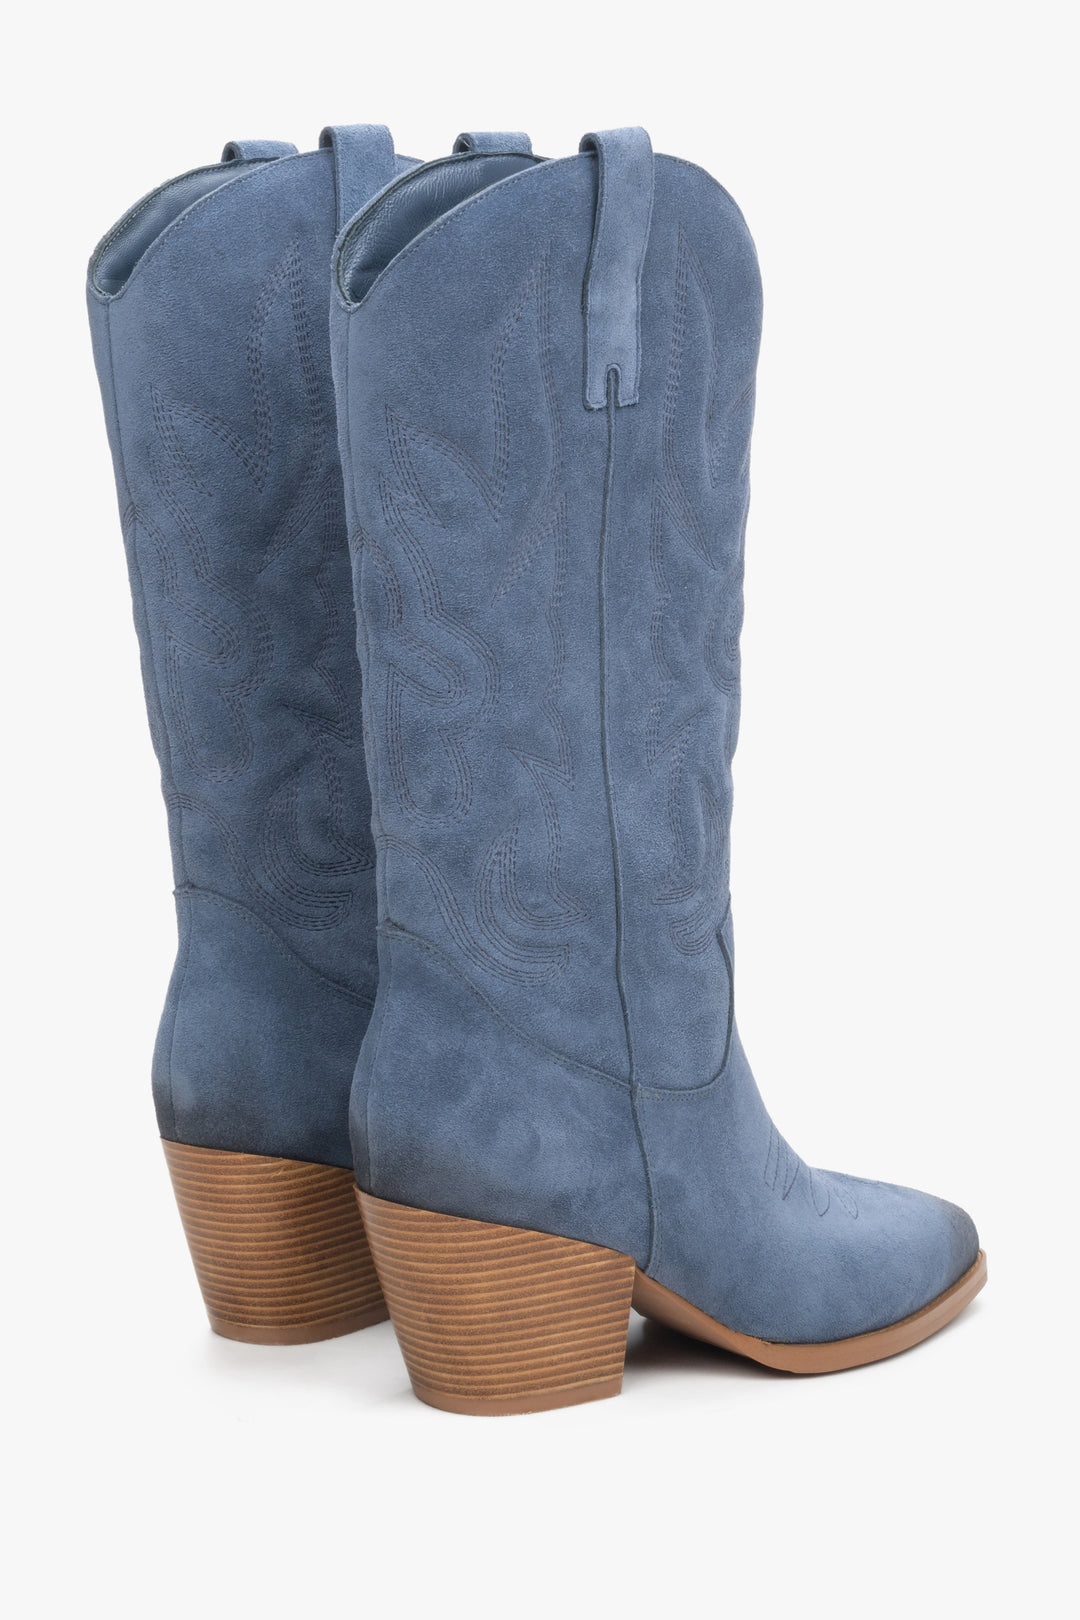 High women's cowboy boots in blue made of genuine velour, Estro - close-up on the side and back of the model.